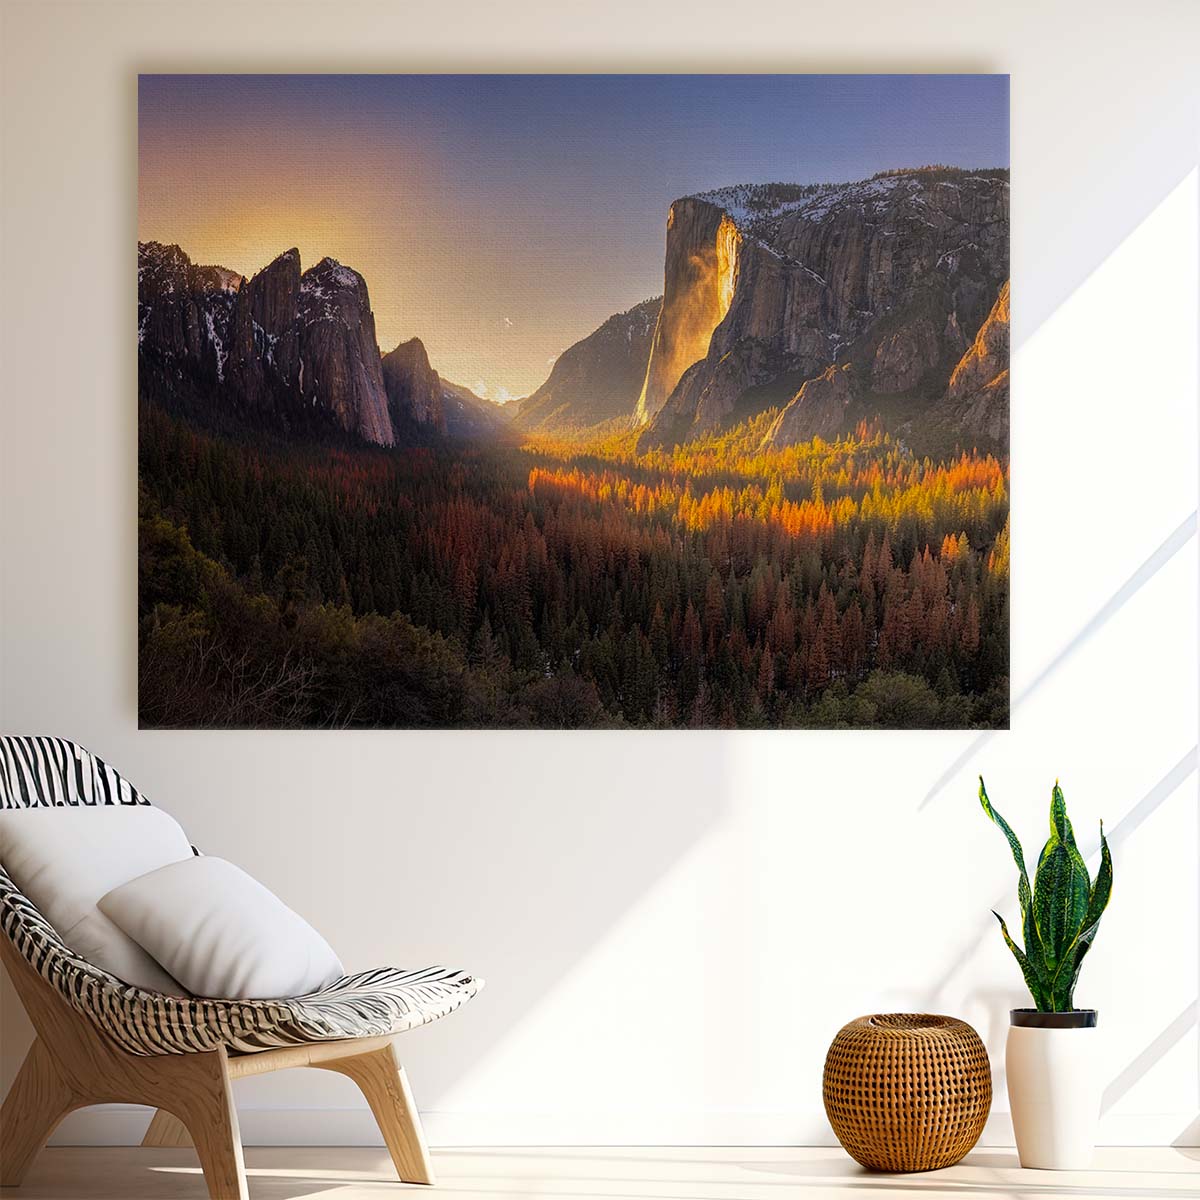 Yosemite Firefall Autumn Glow Panoramic Wall Art by Luxuriance Designs. Made in USA.